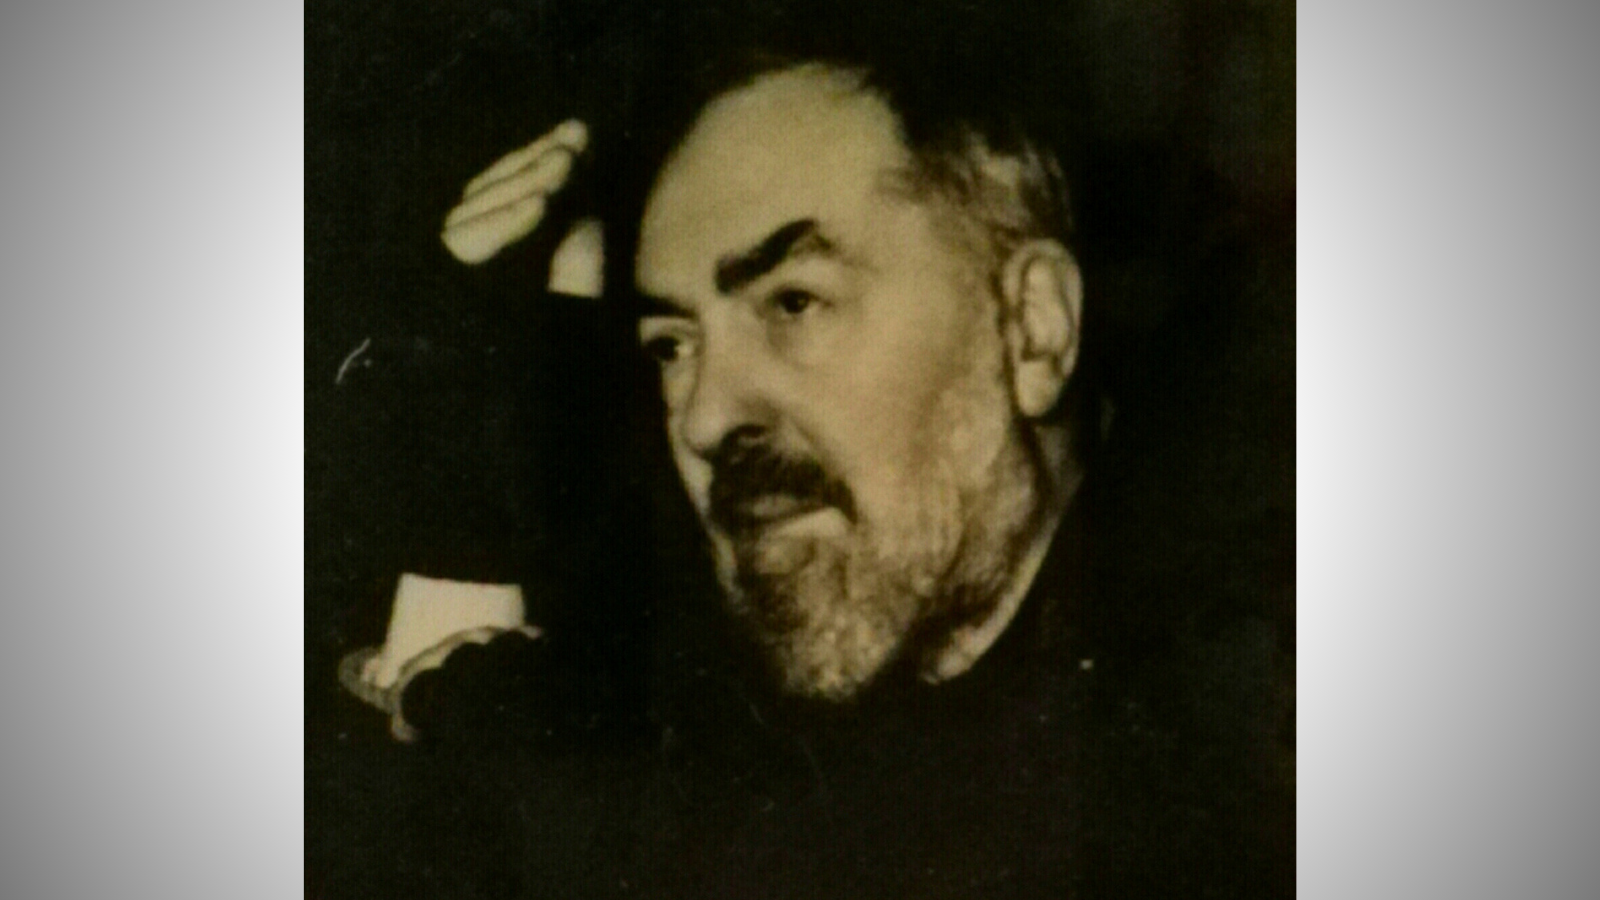 Padre Pio Mysteriously Visits Child With Leukemia: The Little-Known Visions of an Anglican Boy